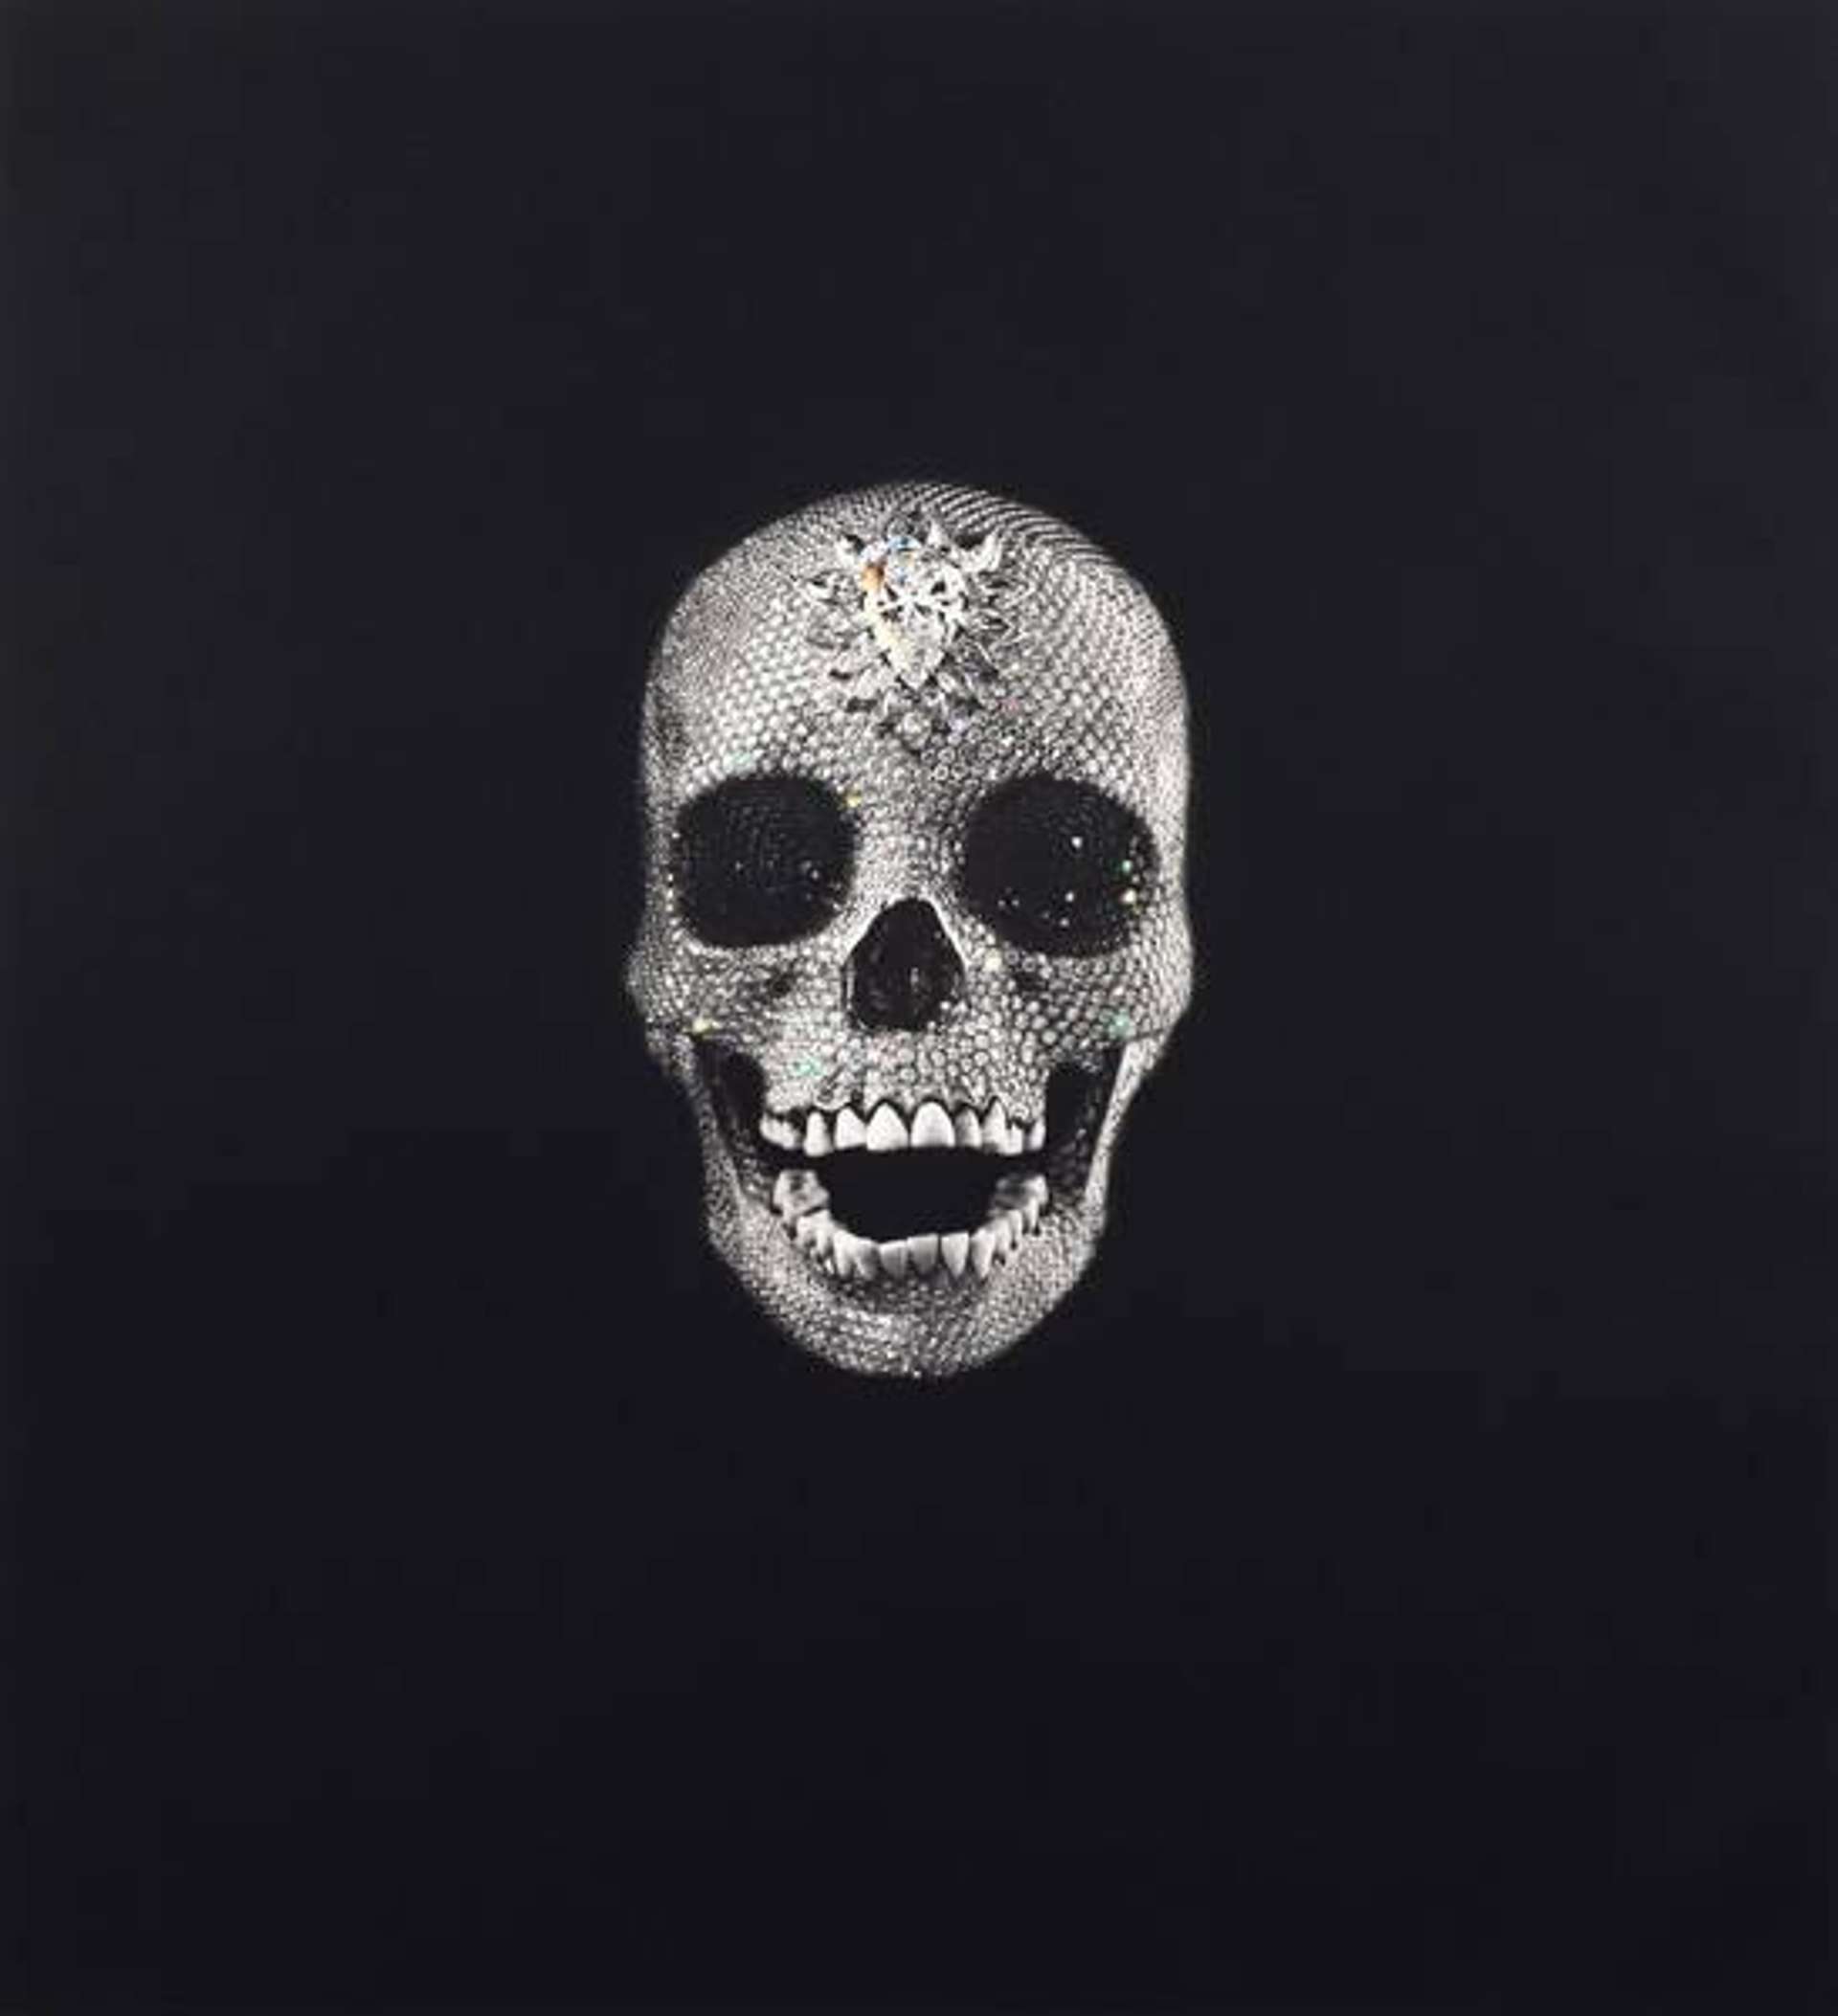 Damien Hirst: Victory Over Death - Signed Print